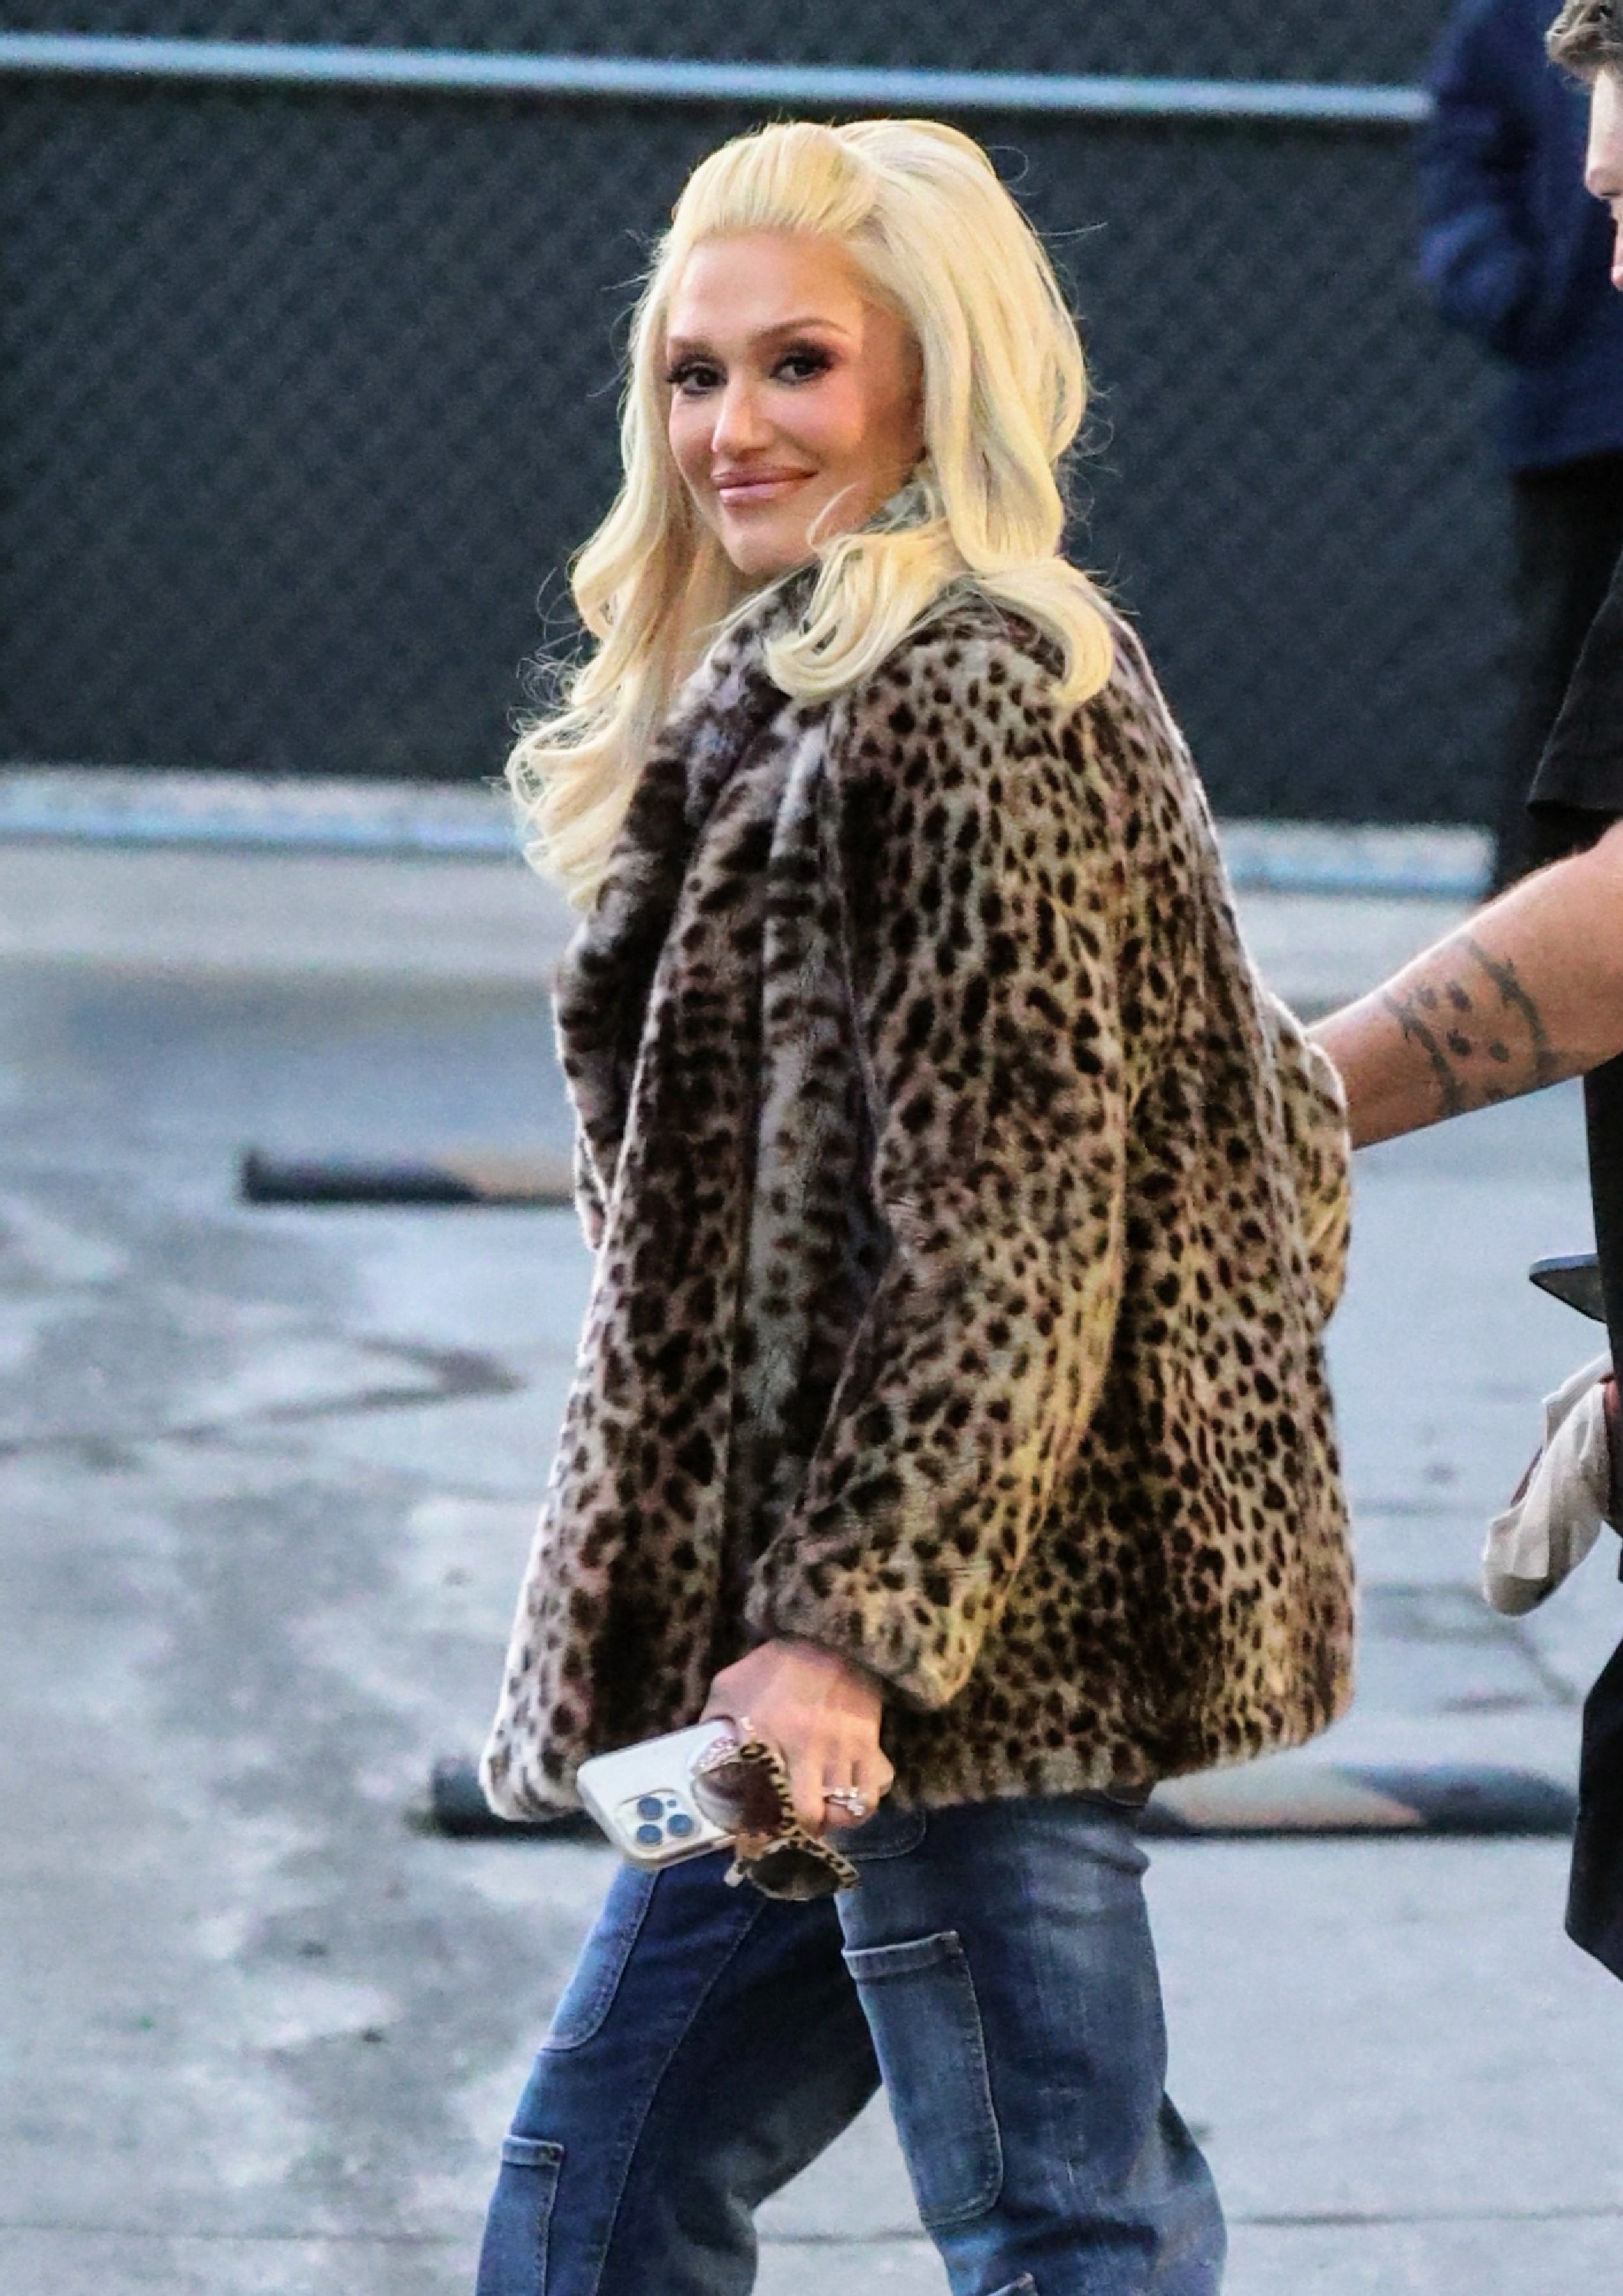 Woman in leopard print coat and jeans looking over her shoulder